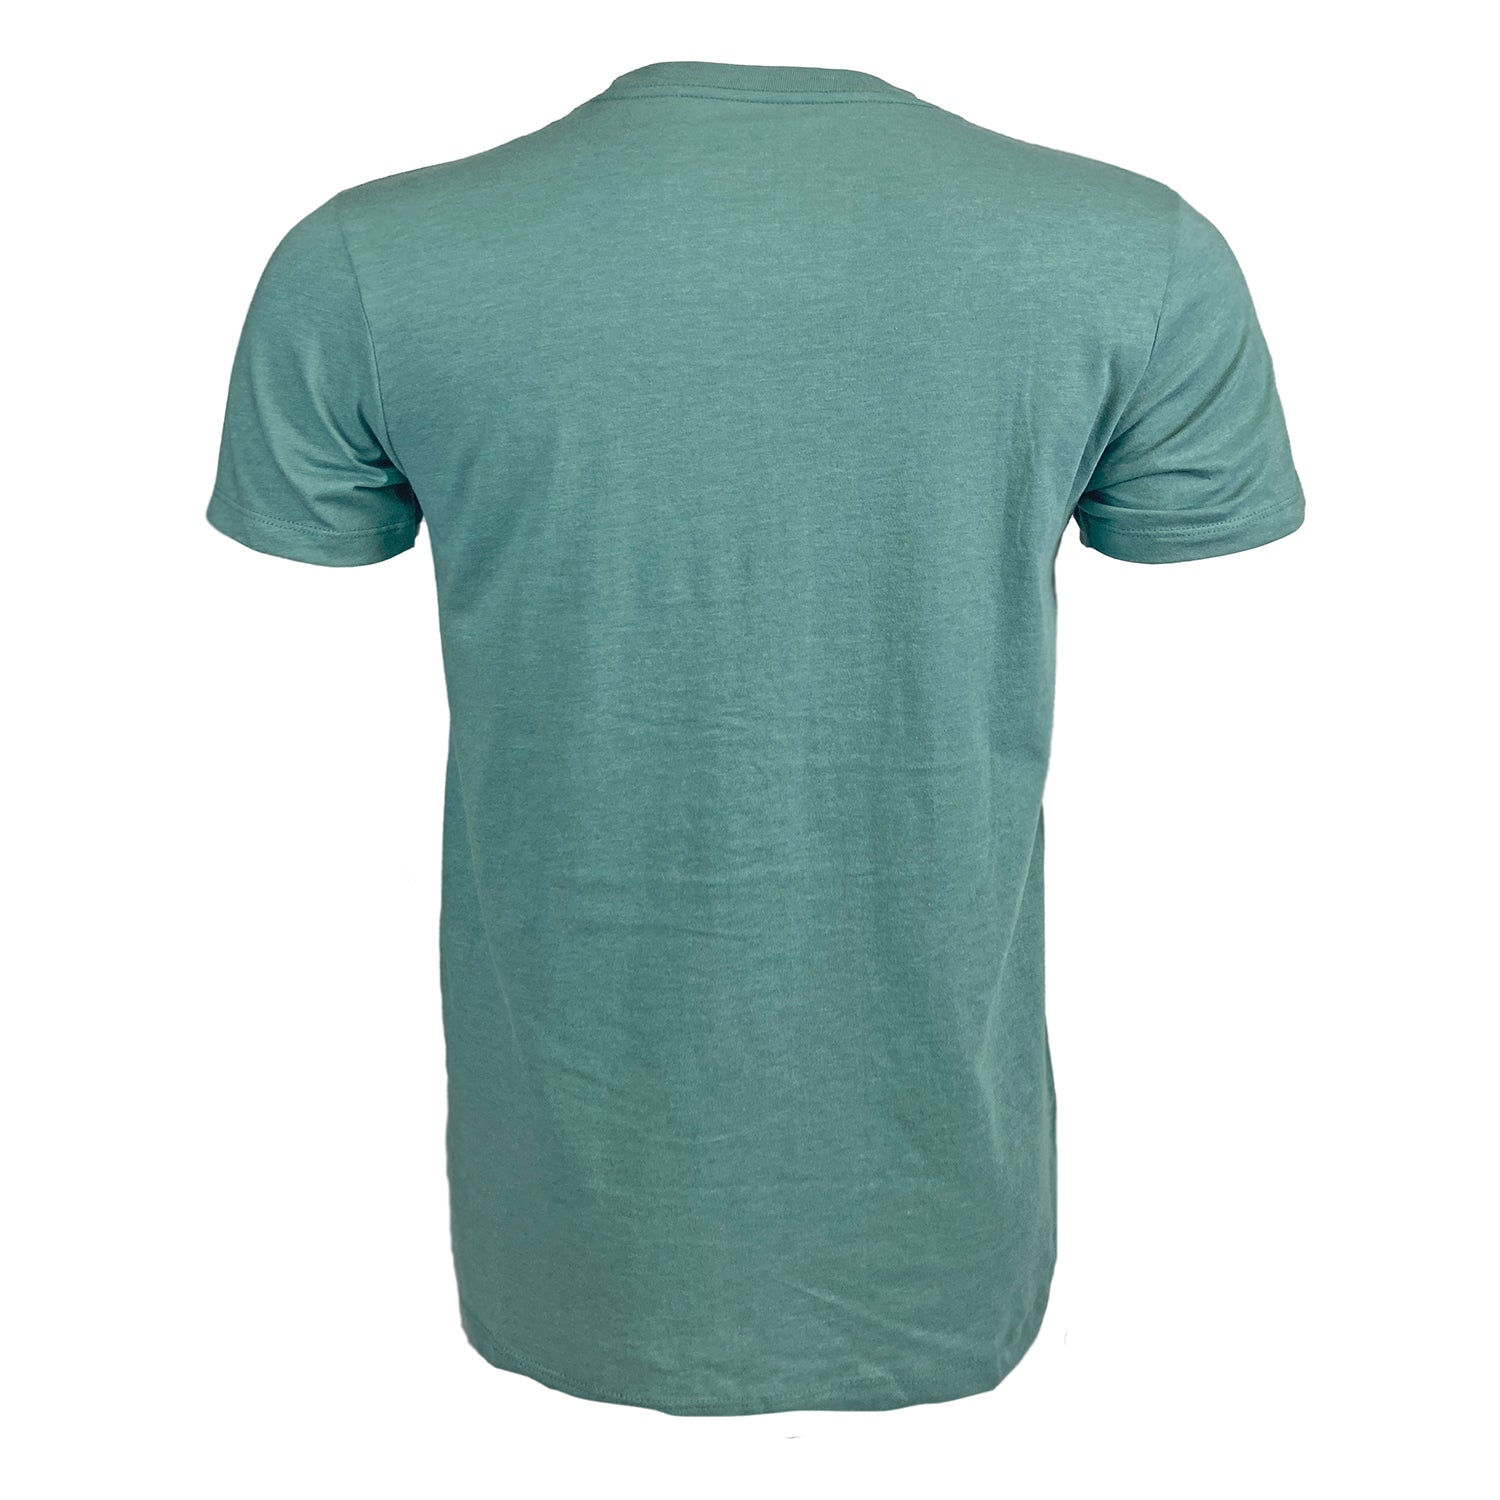 Blue tee shown from the rear.